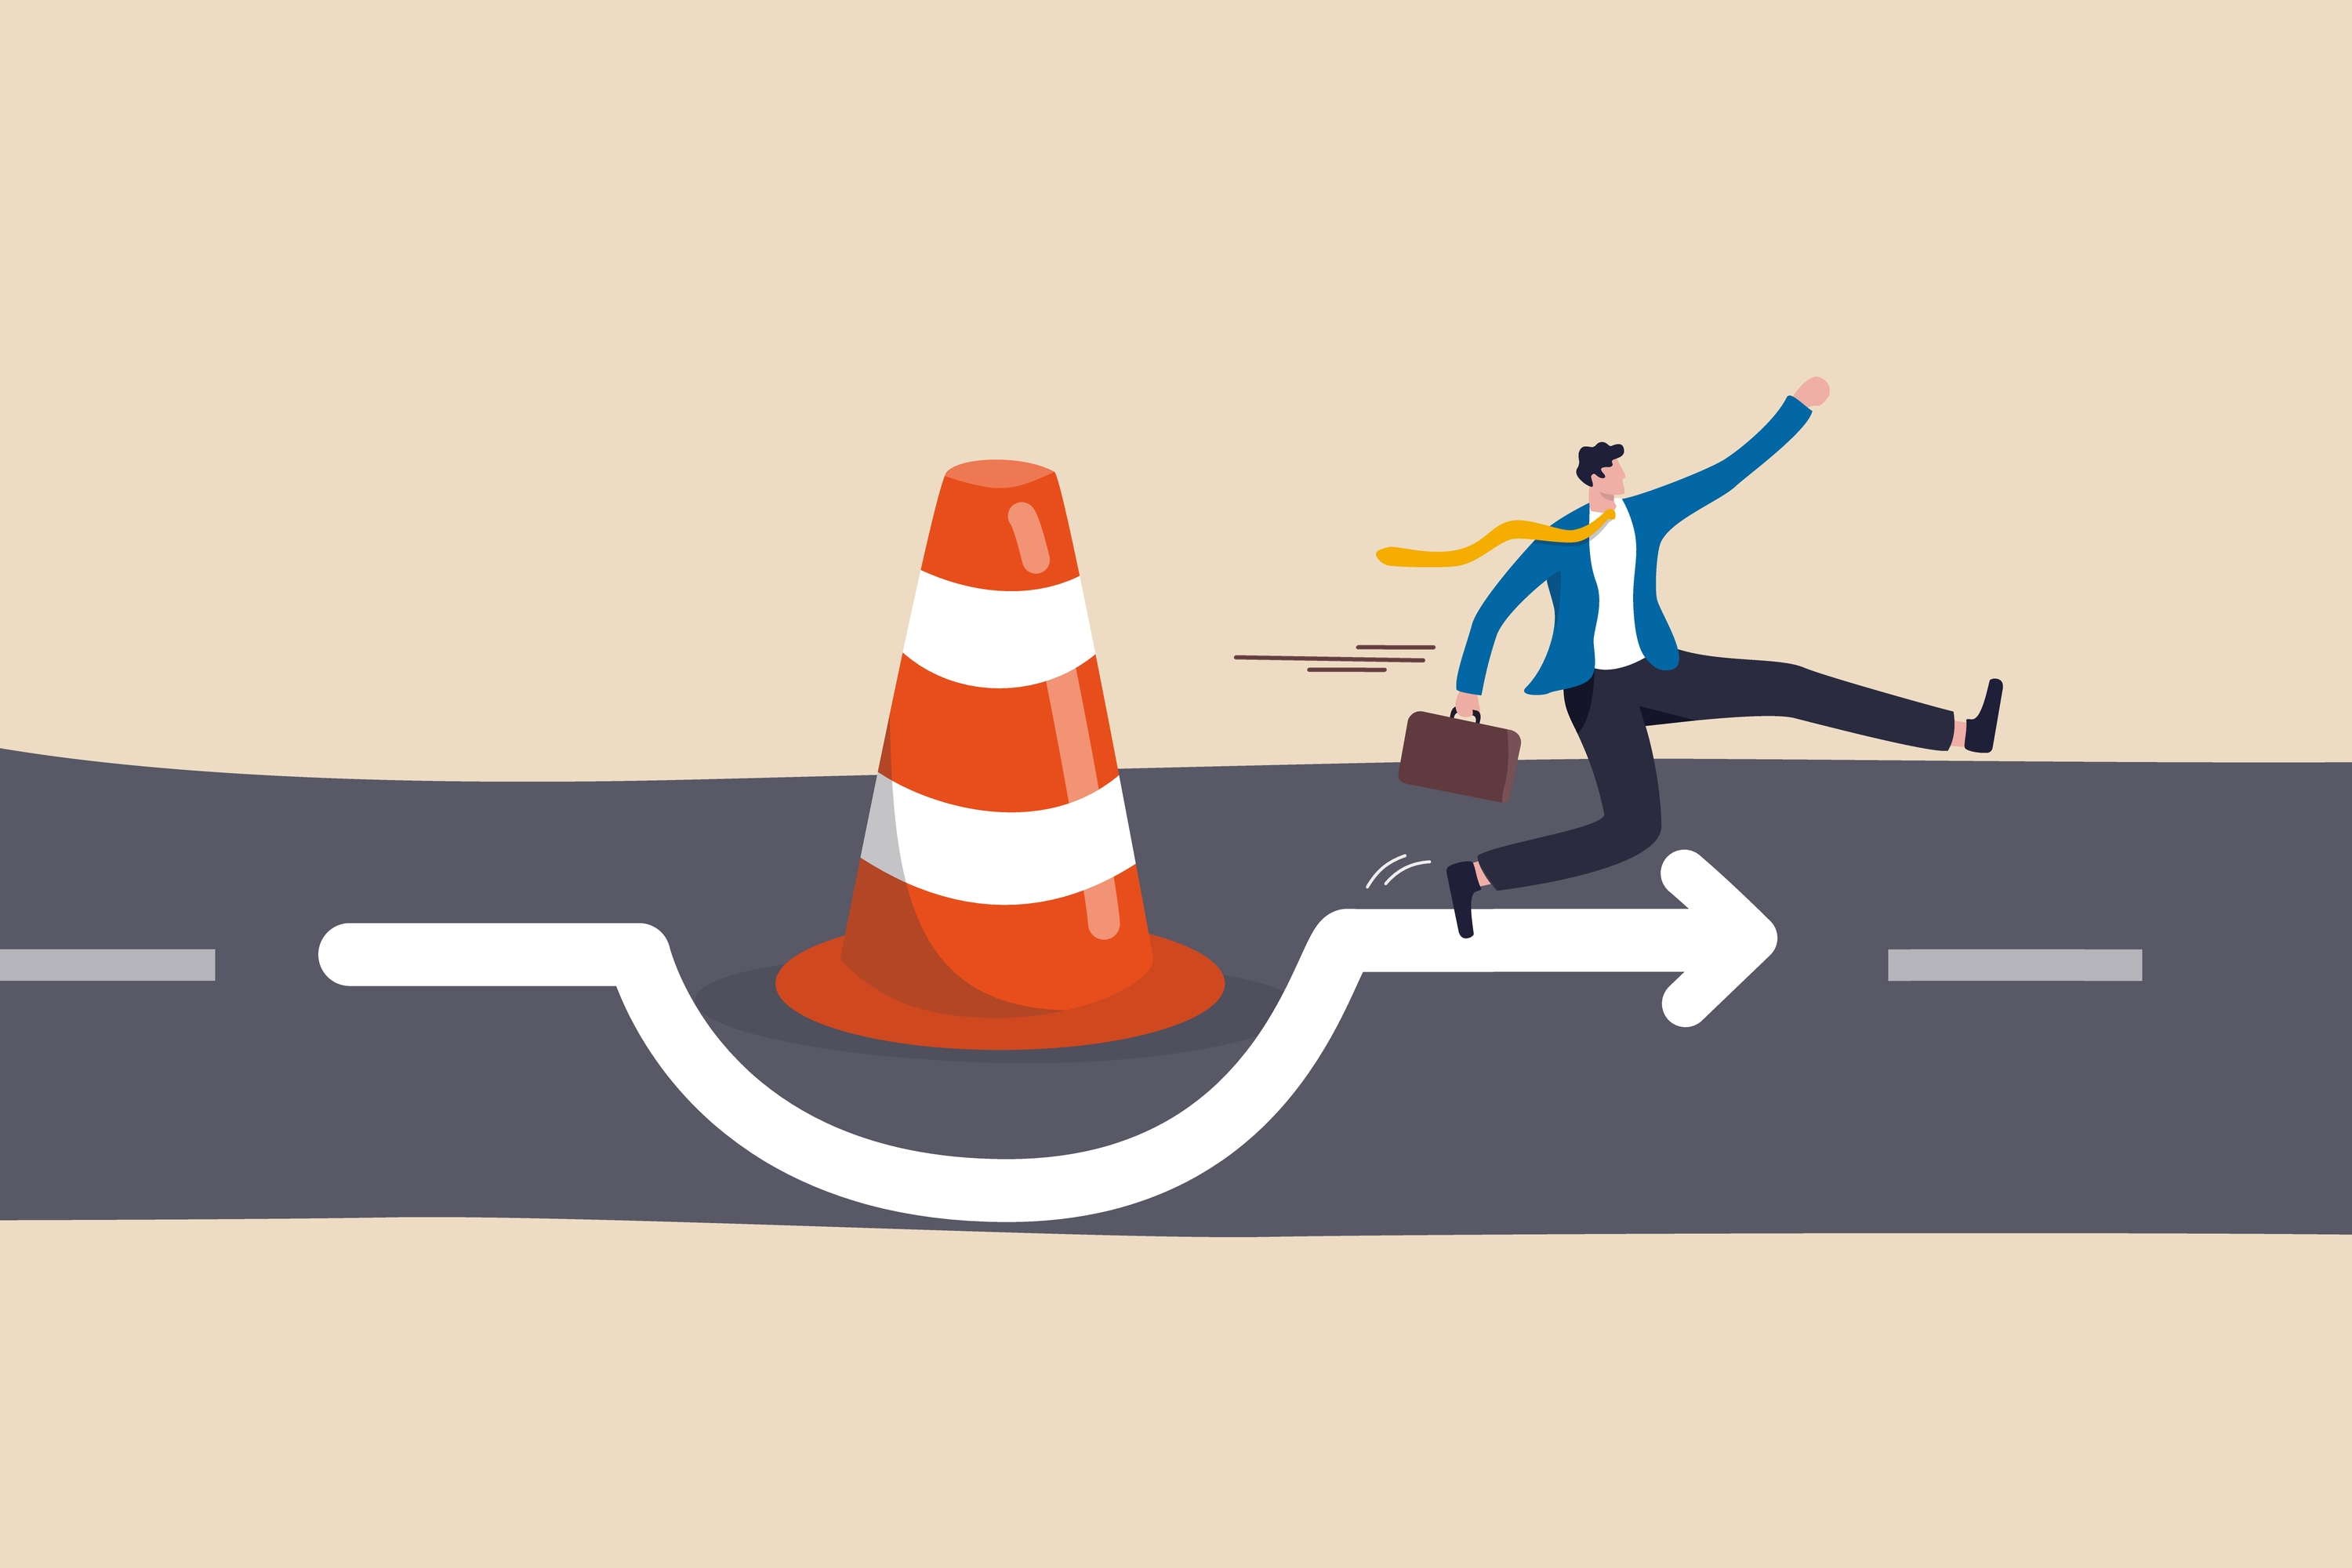 Man on road running past safety cone